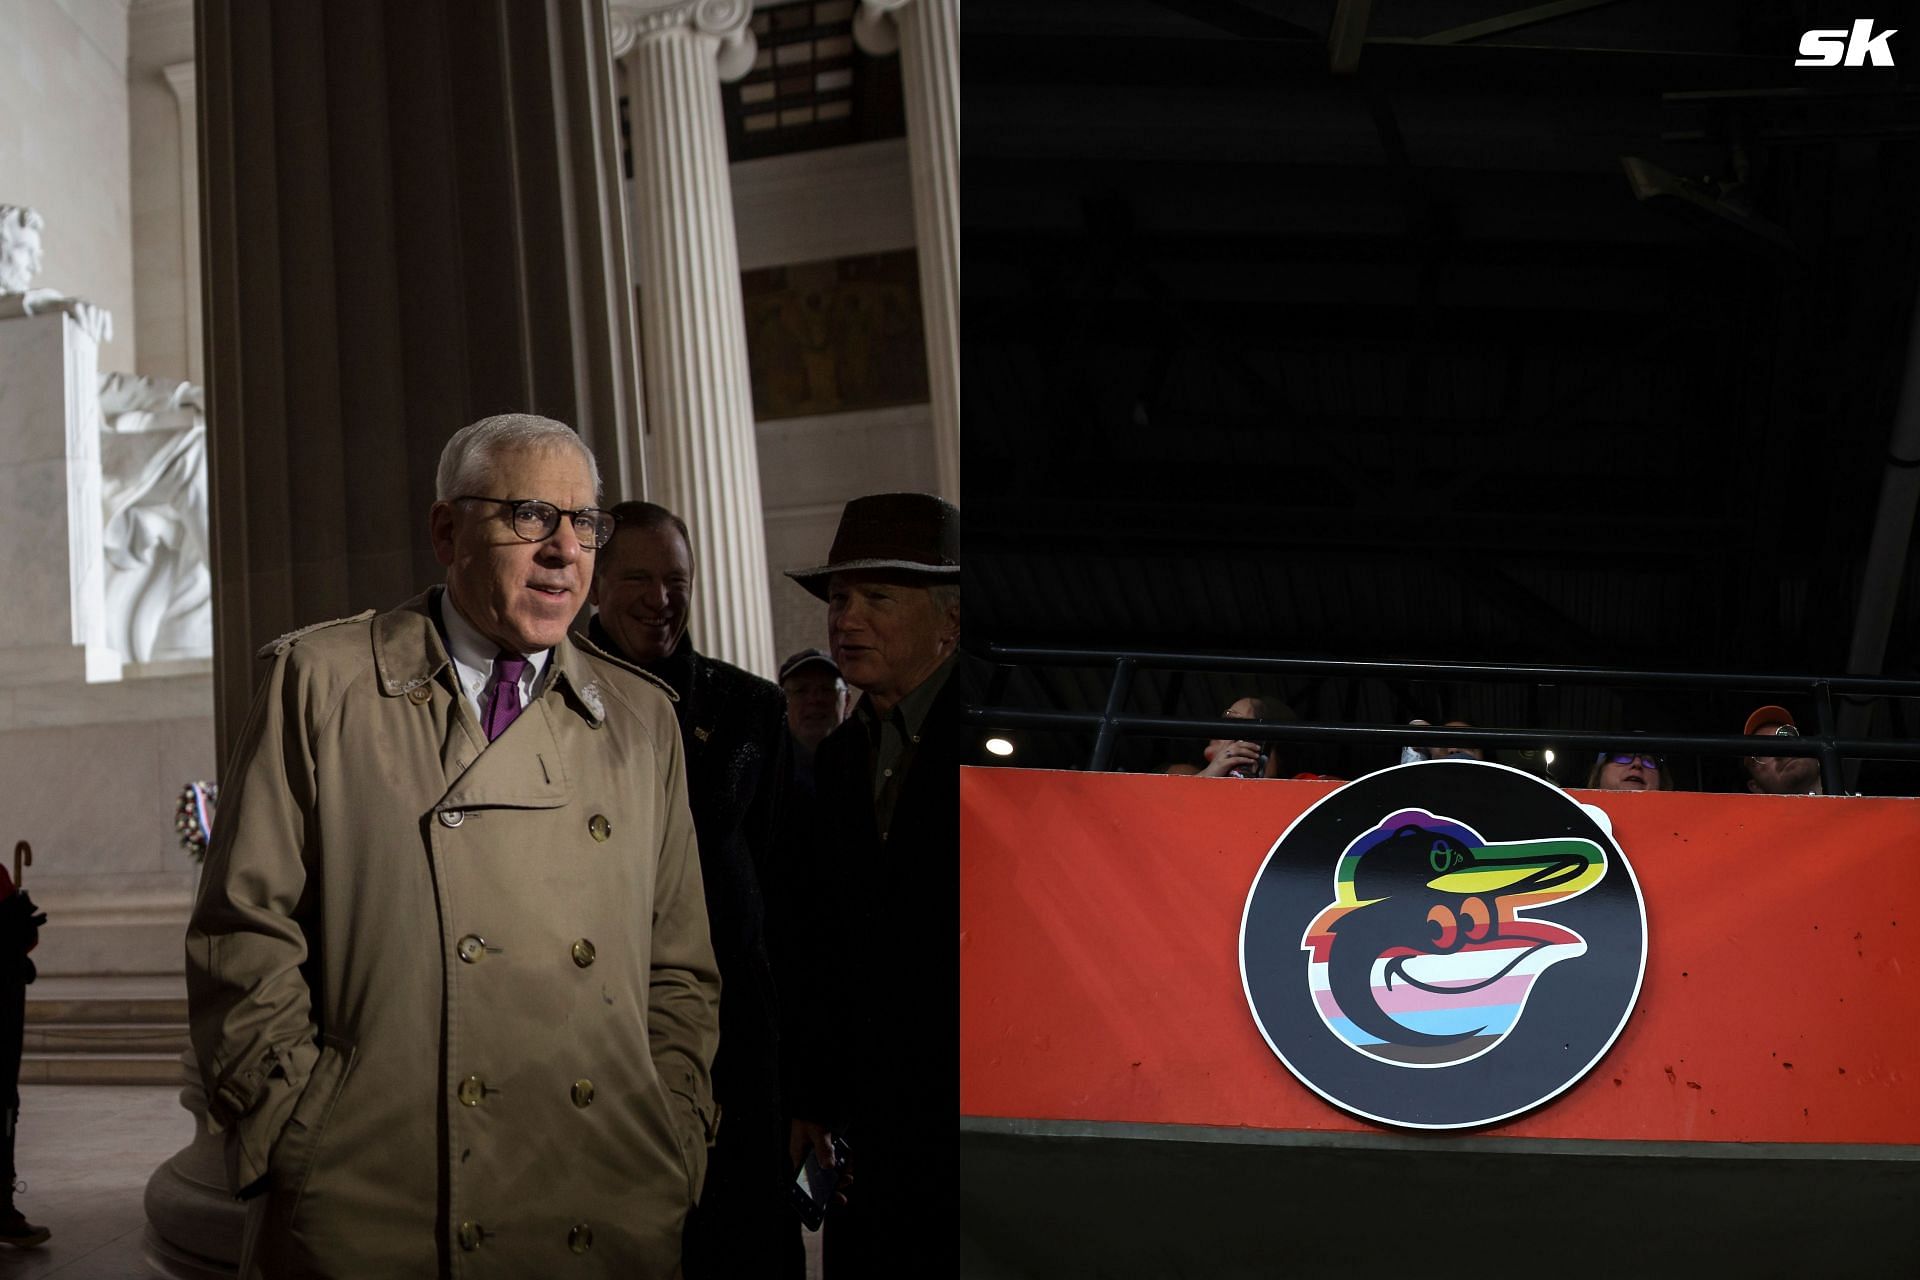 David Rubenstein maybe will be the new owner of the Orioles